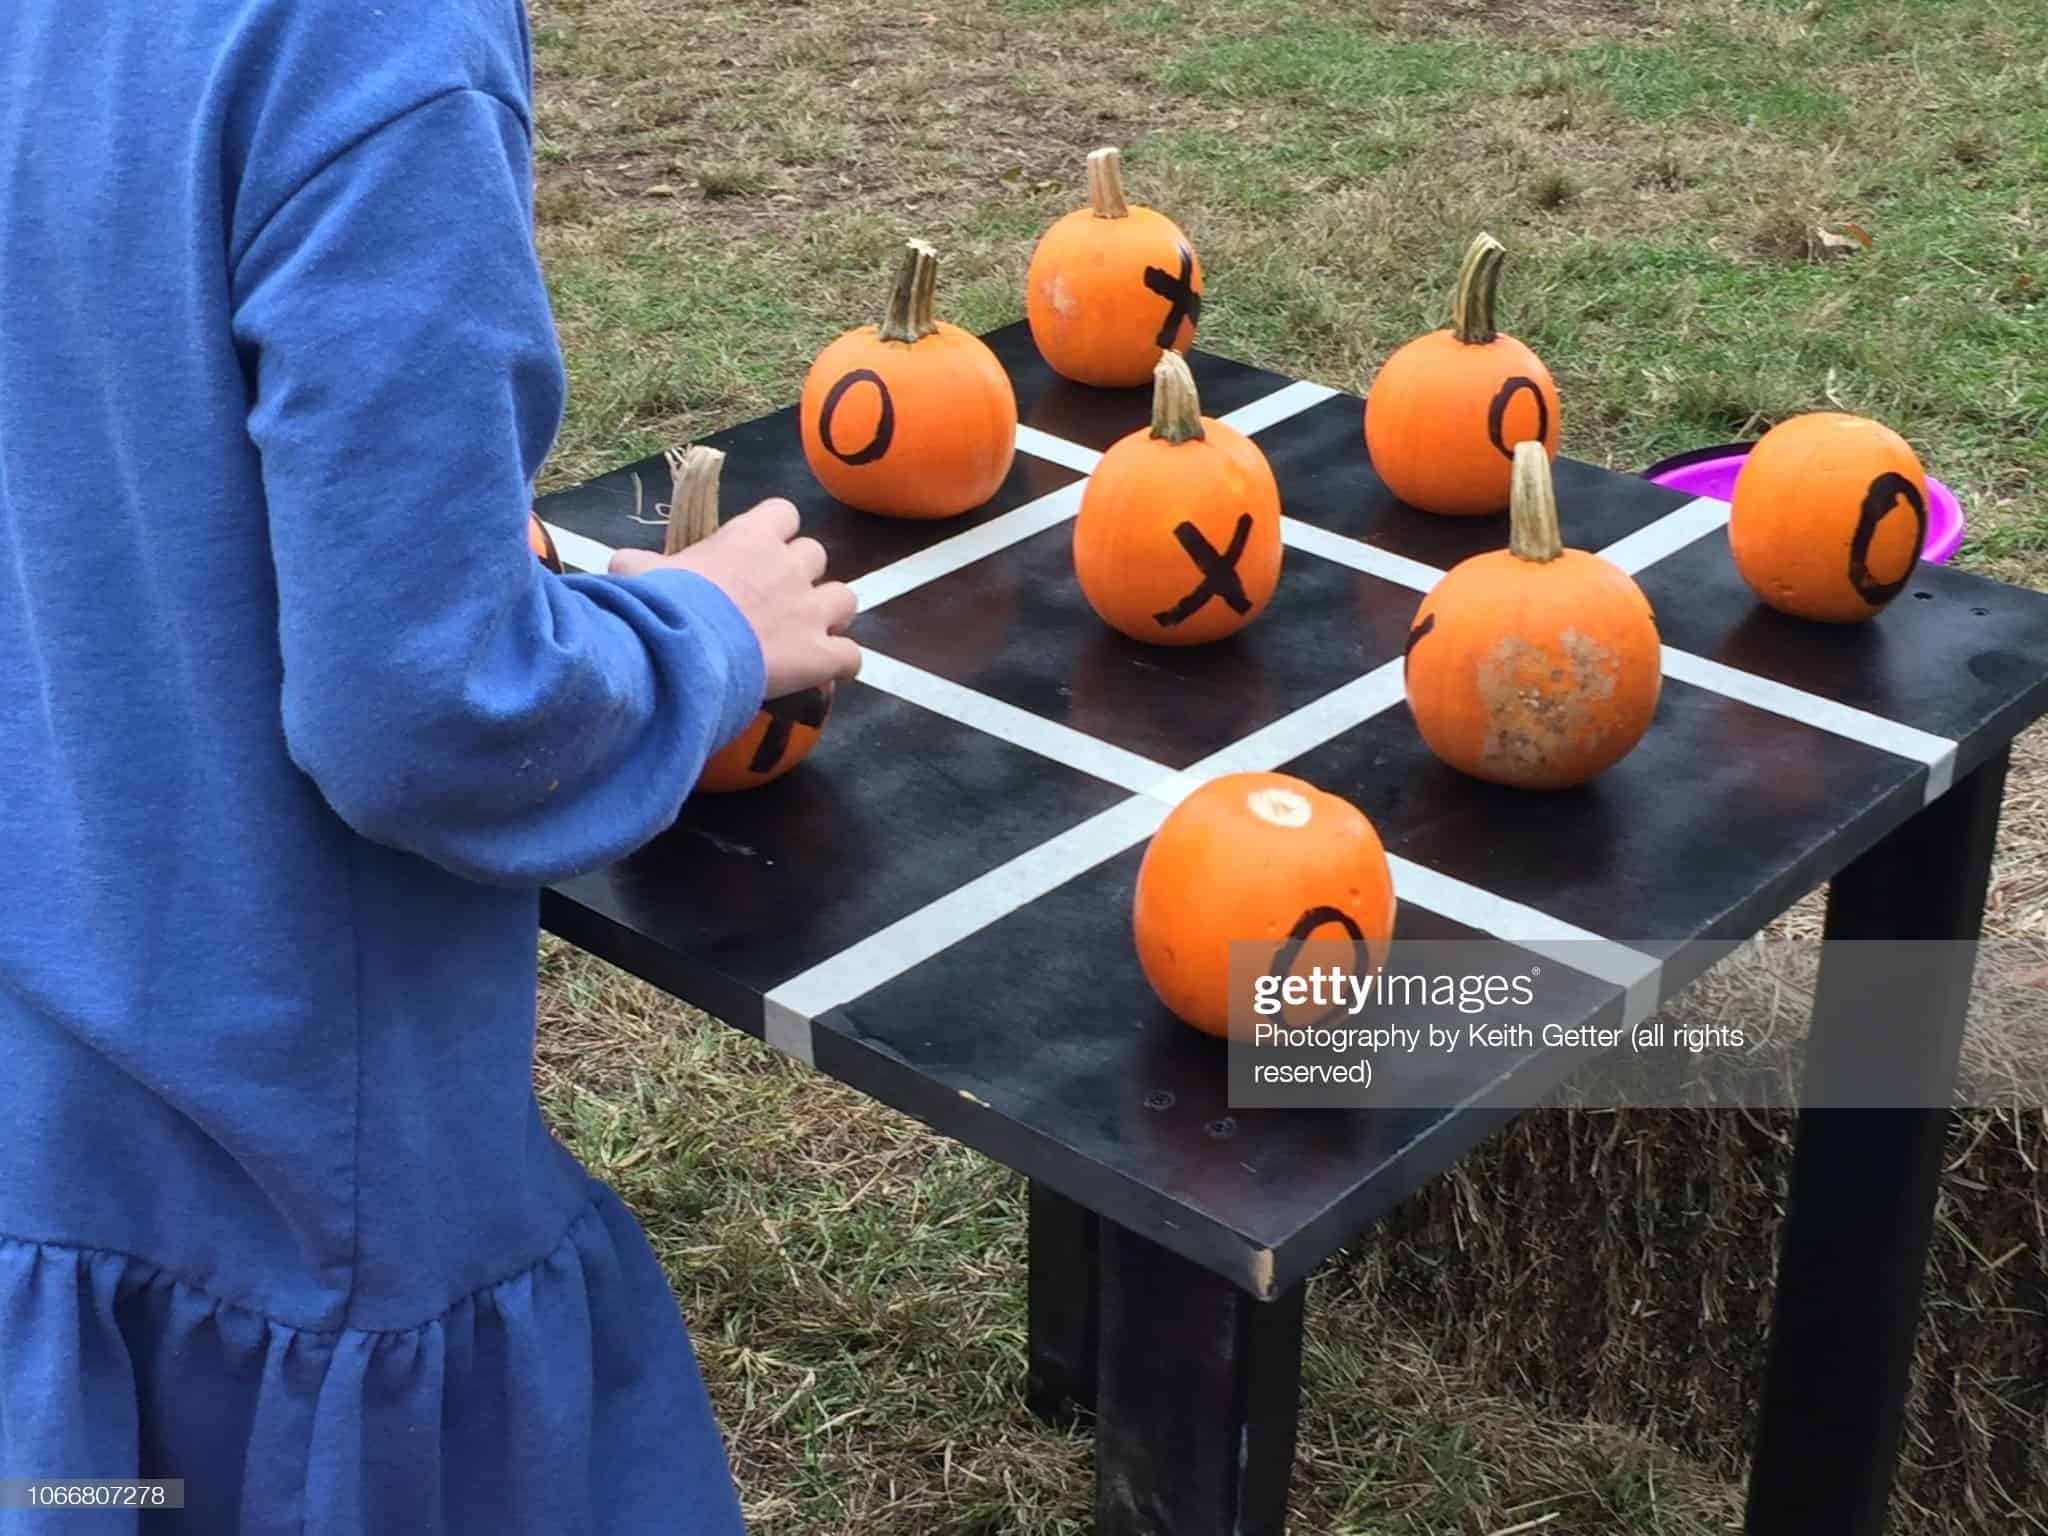 Fall Festival Games | 20 Fun-filled Activities For All Ages - AhaSlides